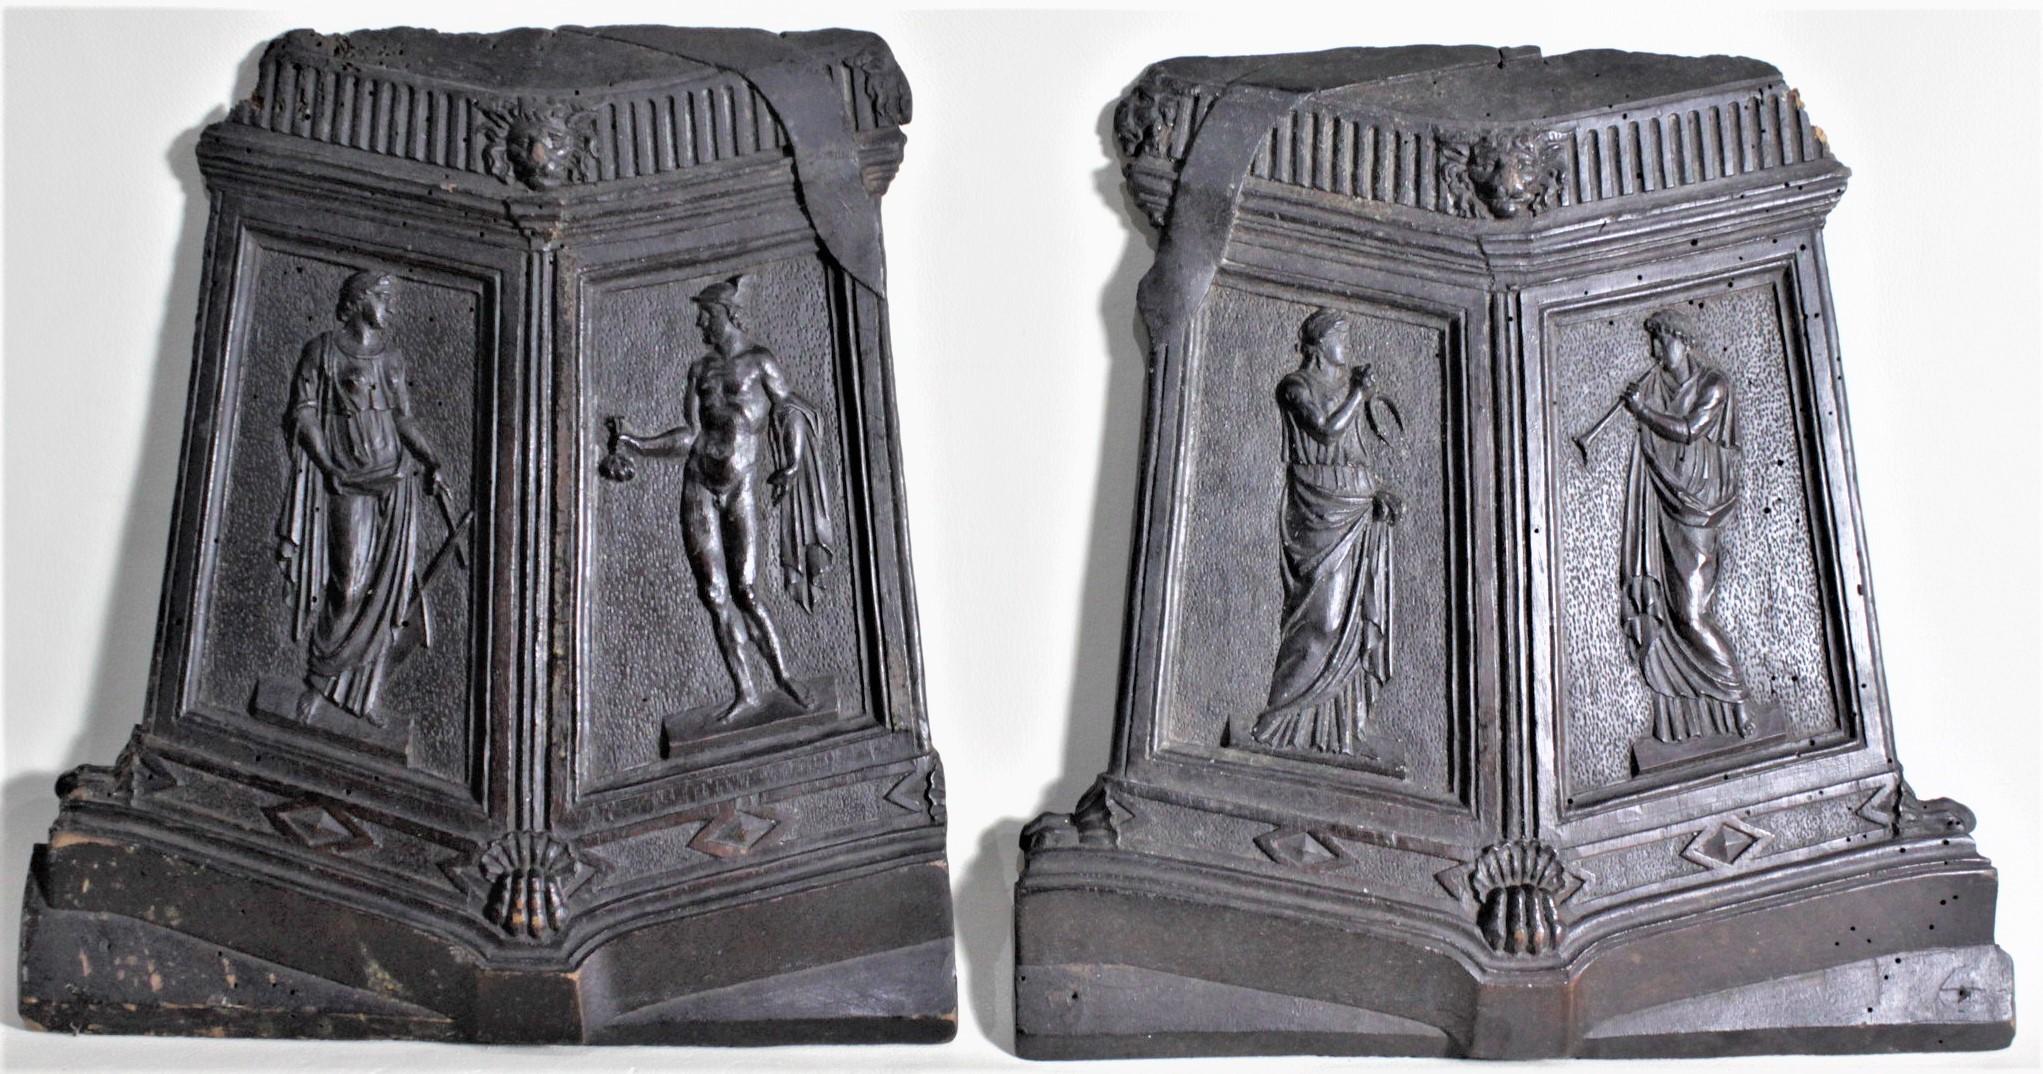 English Set of 4 Antique Carved Wooden Panels or Wall Plaques with Neoclassical Figures